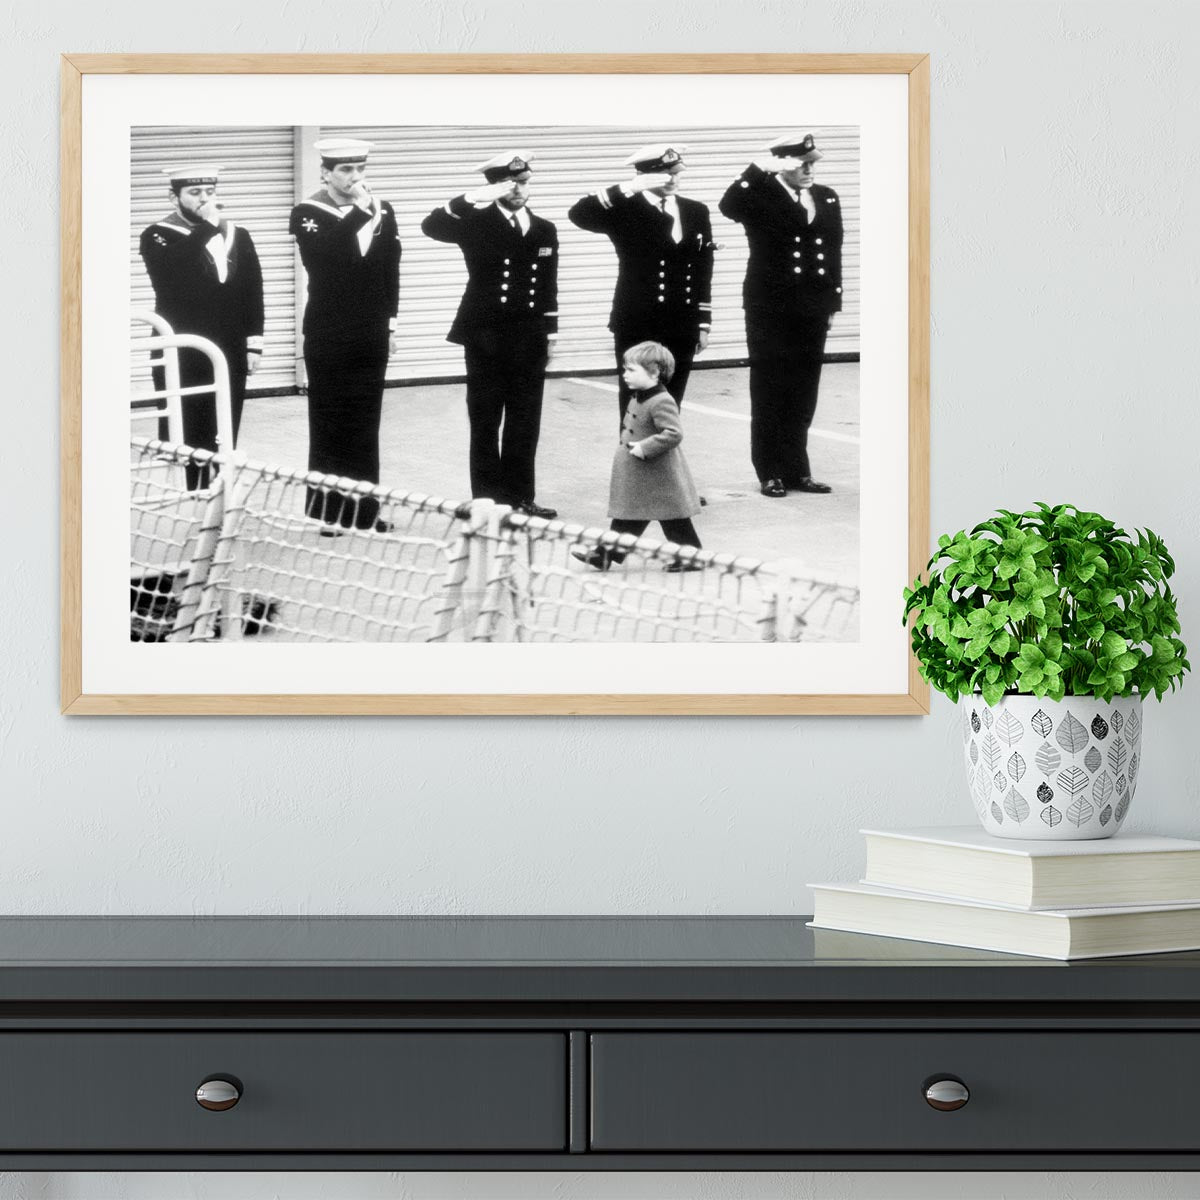 Prince William visiting the Royal Navy as a small child Framed Print - Canvas Art Rocks - 3